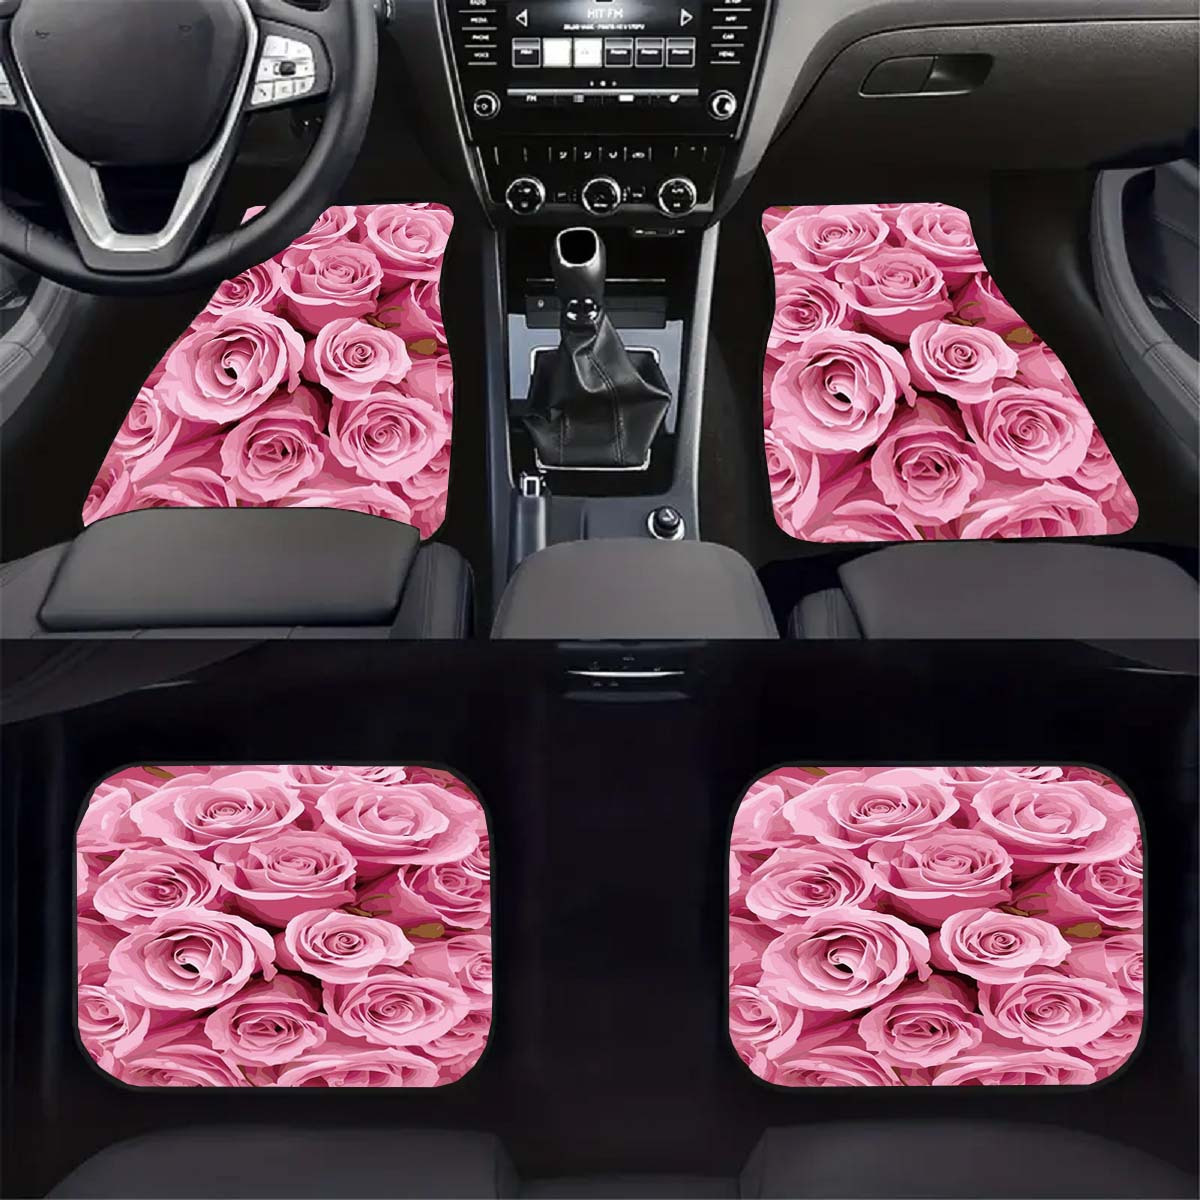 

1pc/2pcs/4pcs Rose Flowers Printed Car Floor Mats, Car Front And Rear Floor Mats, Universal Fit, Non-slip, Washable And Easy To Clean